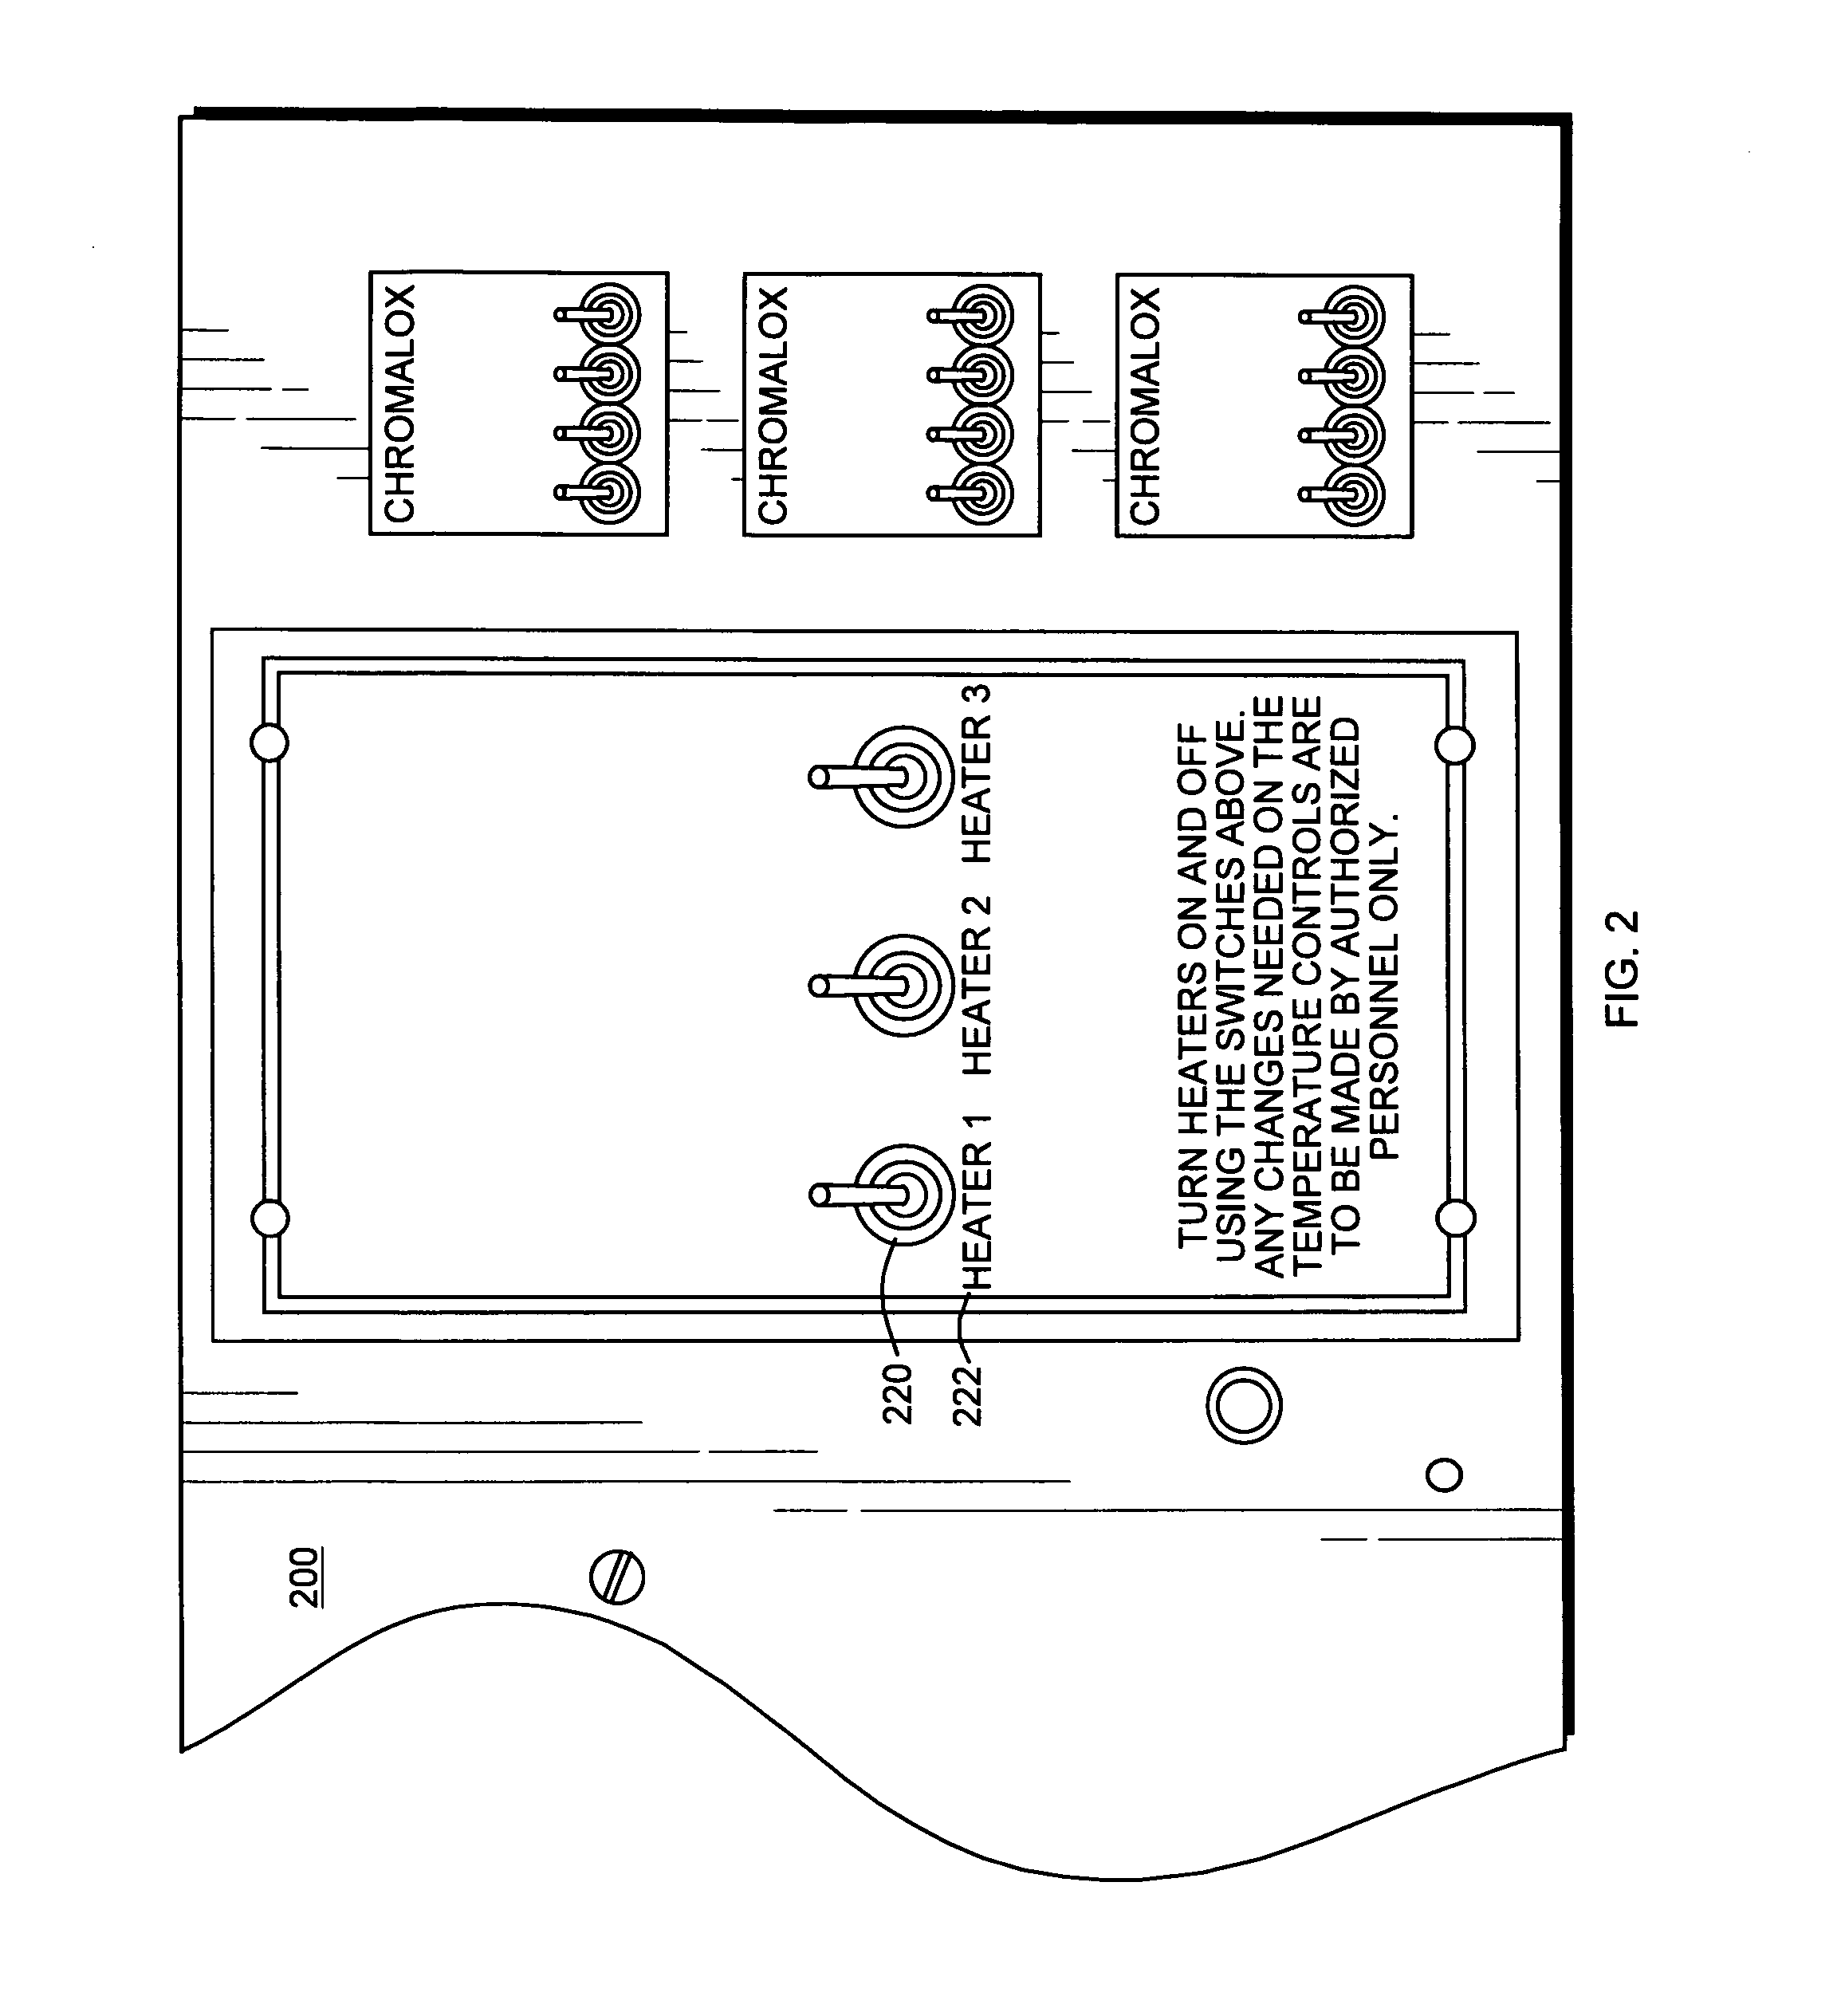 Process for depopulating a circuit board